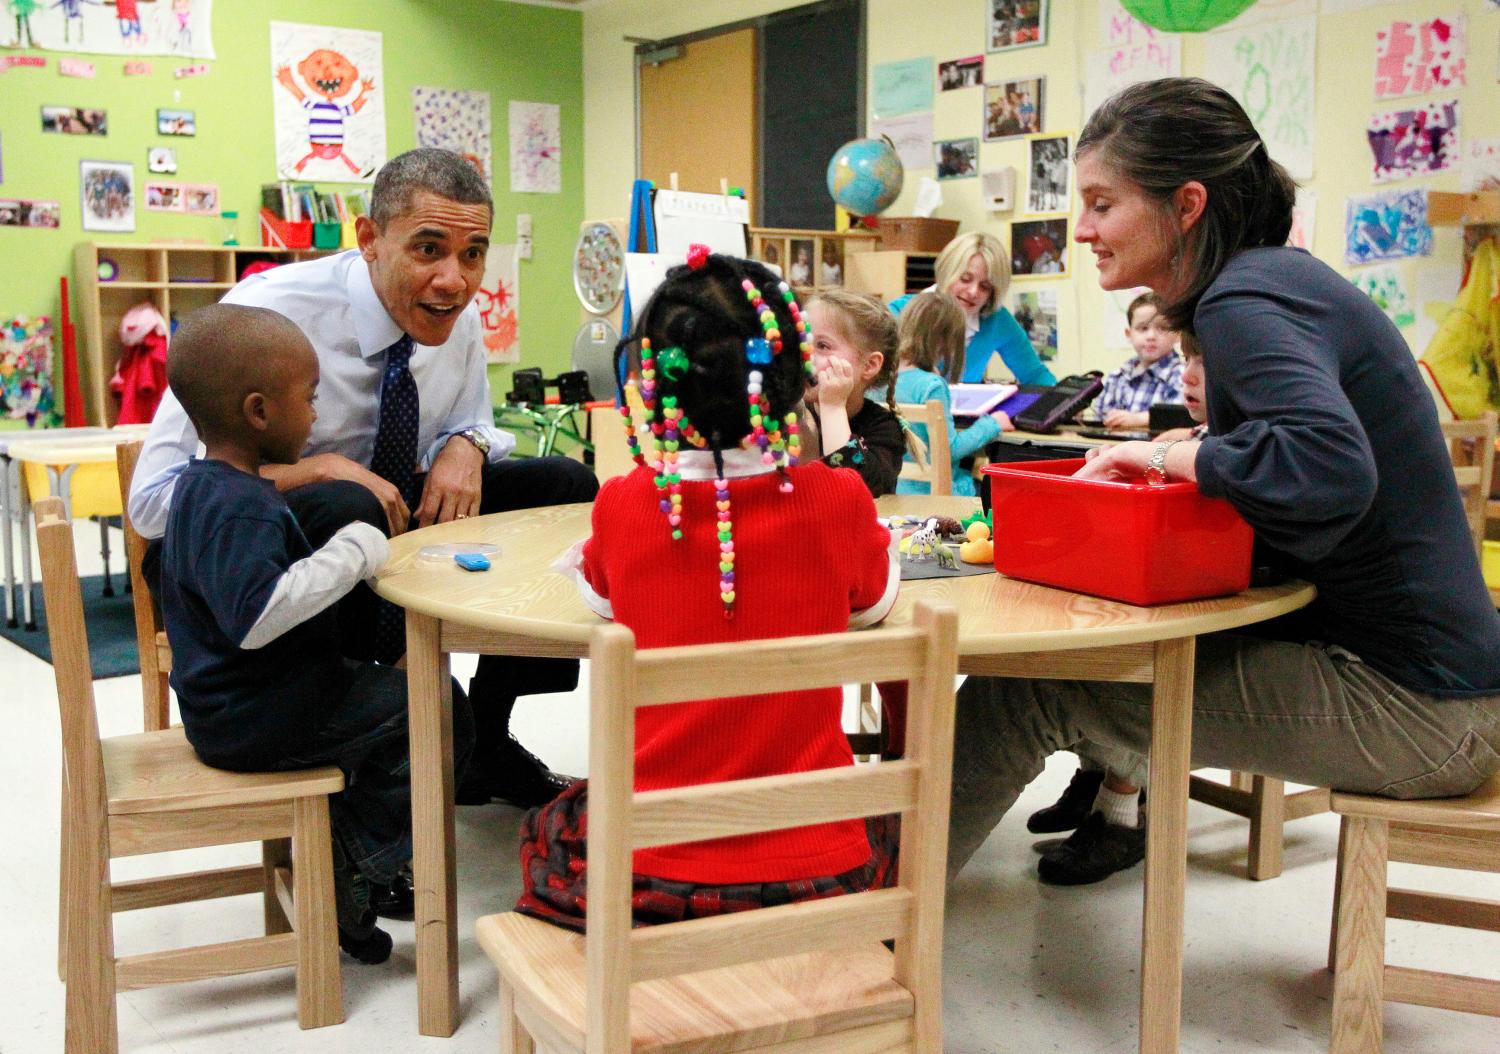 U.S. President Barack Obama meets with children in a pre-kindergarten classroom at College Heights early childhood learning center in Decatur